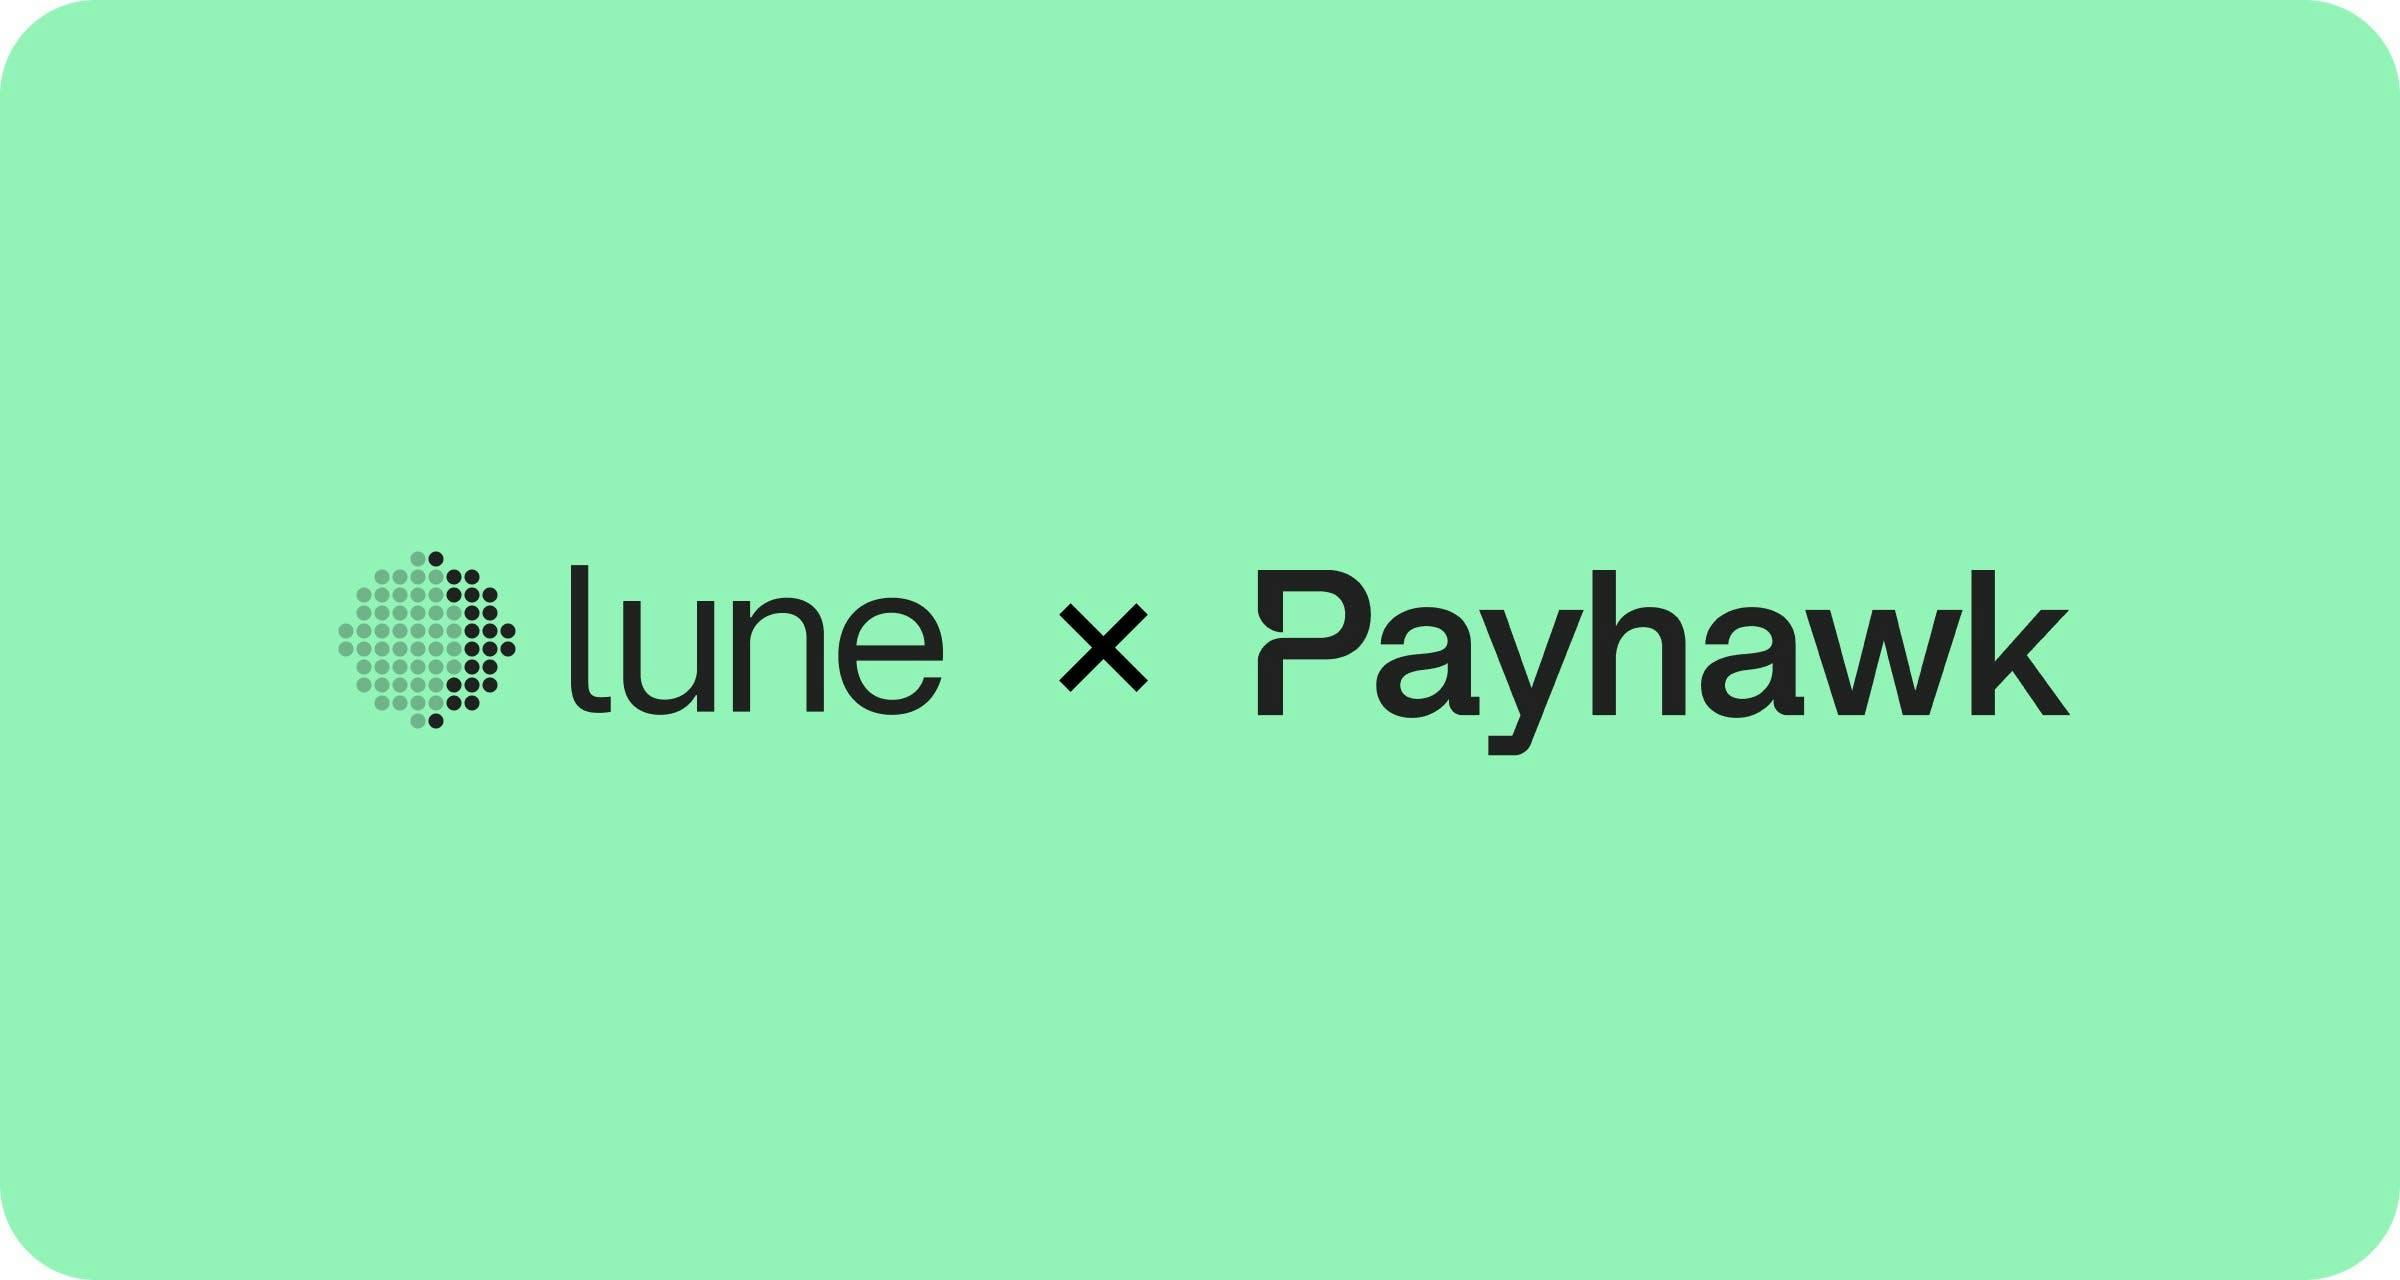 Spend management meets sustainability: Payhawk partners with Lune